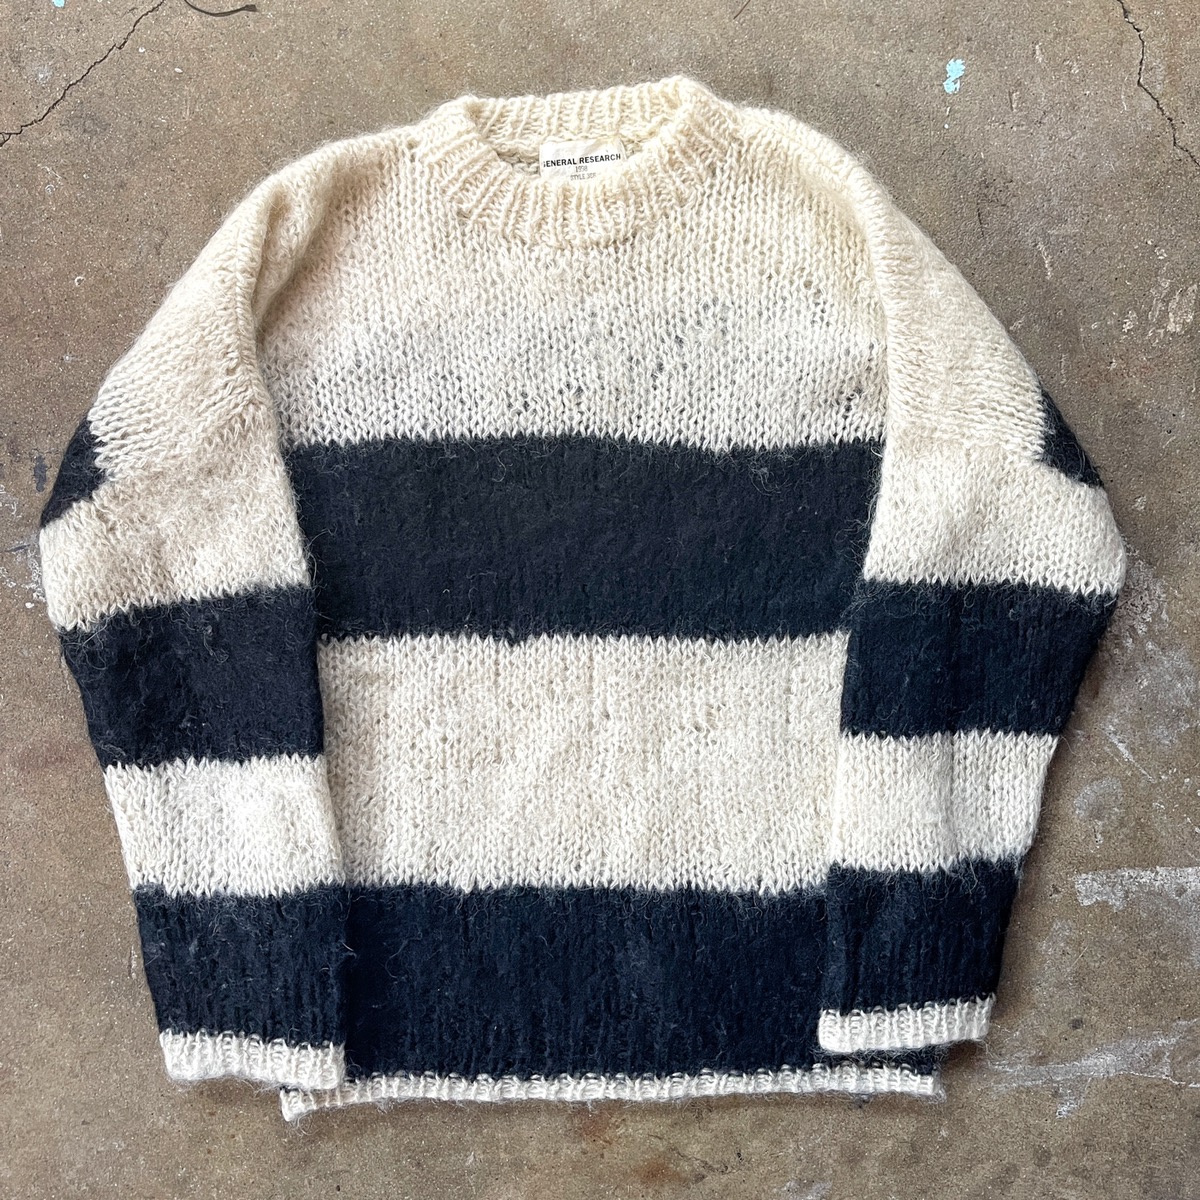 General Research AW1998 Mohair Sweater - 1